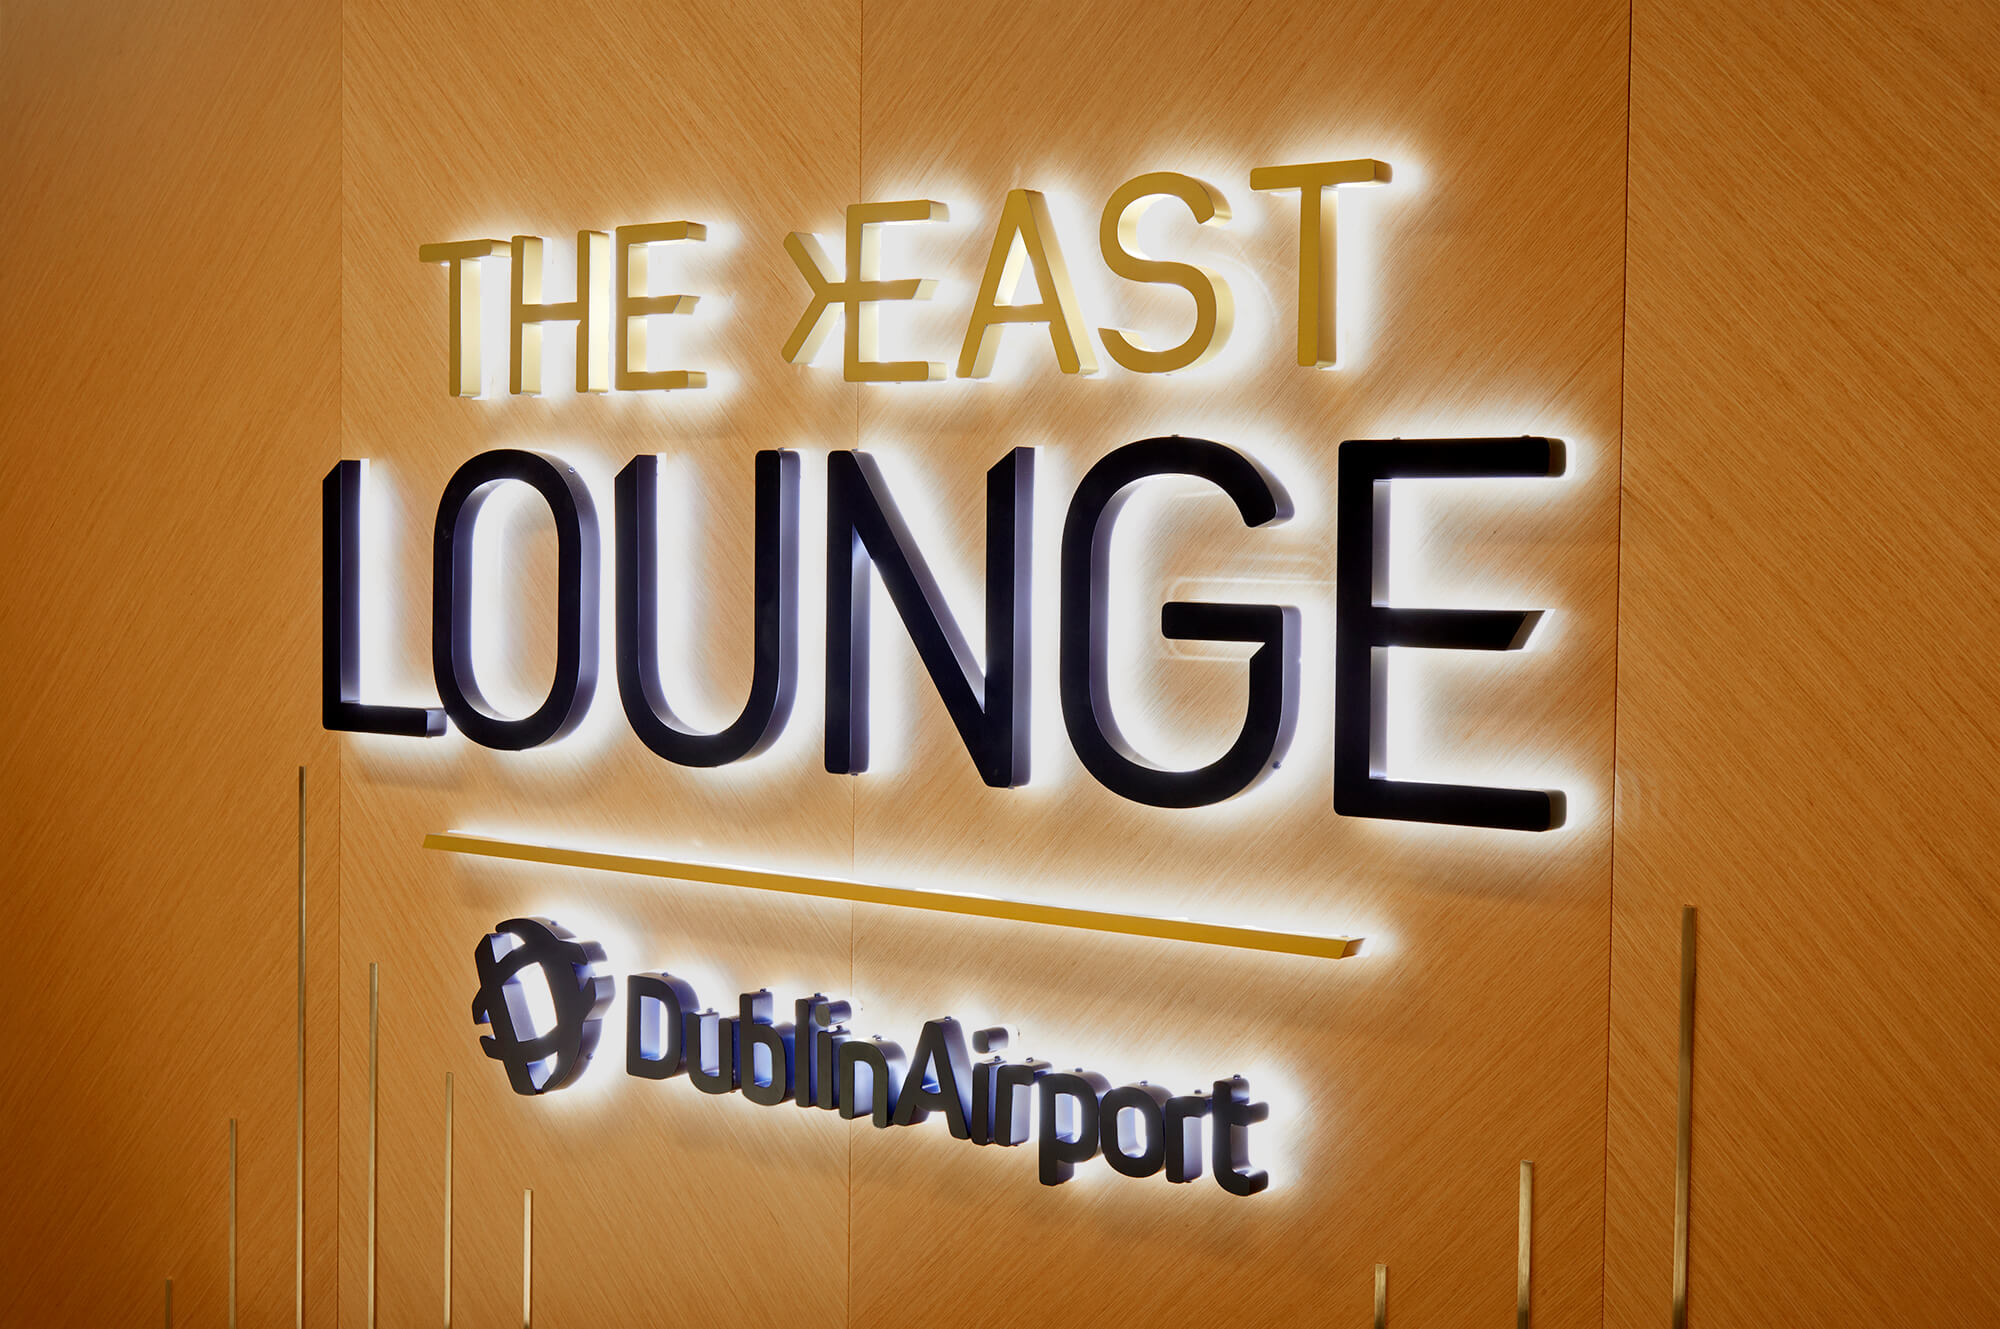 The East Lounge at Dublin Airport